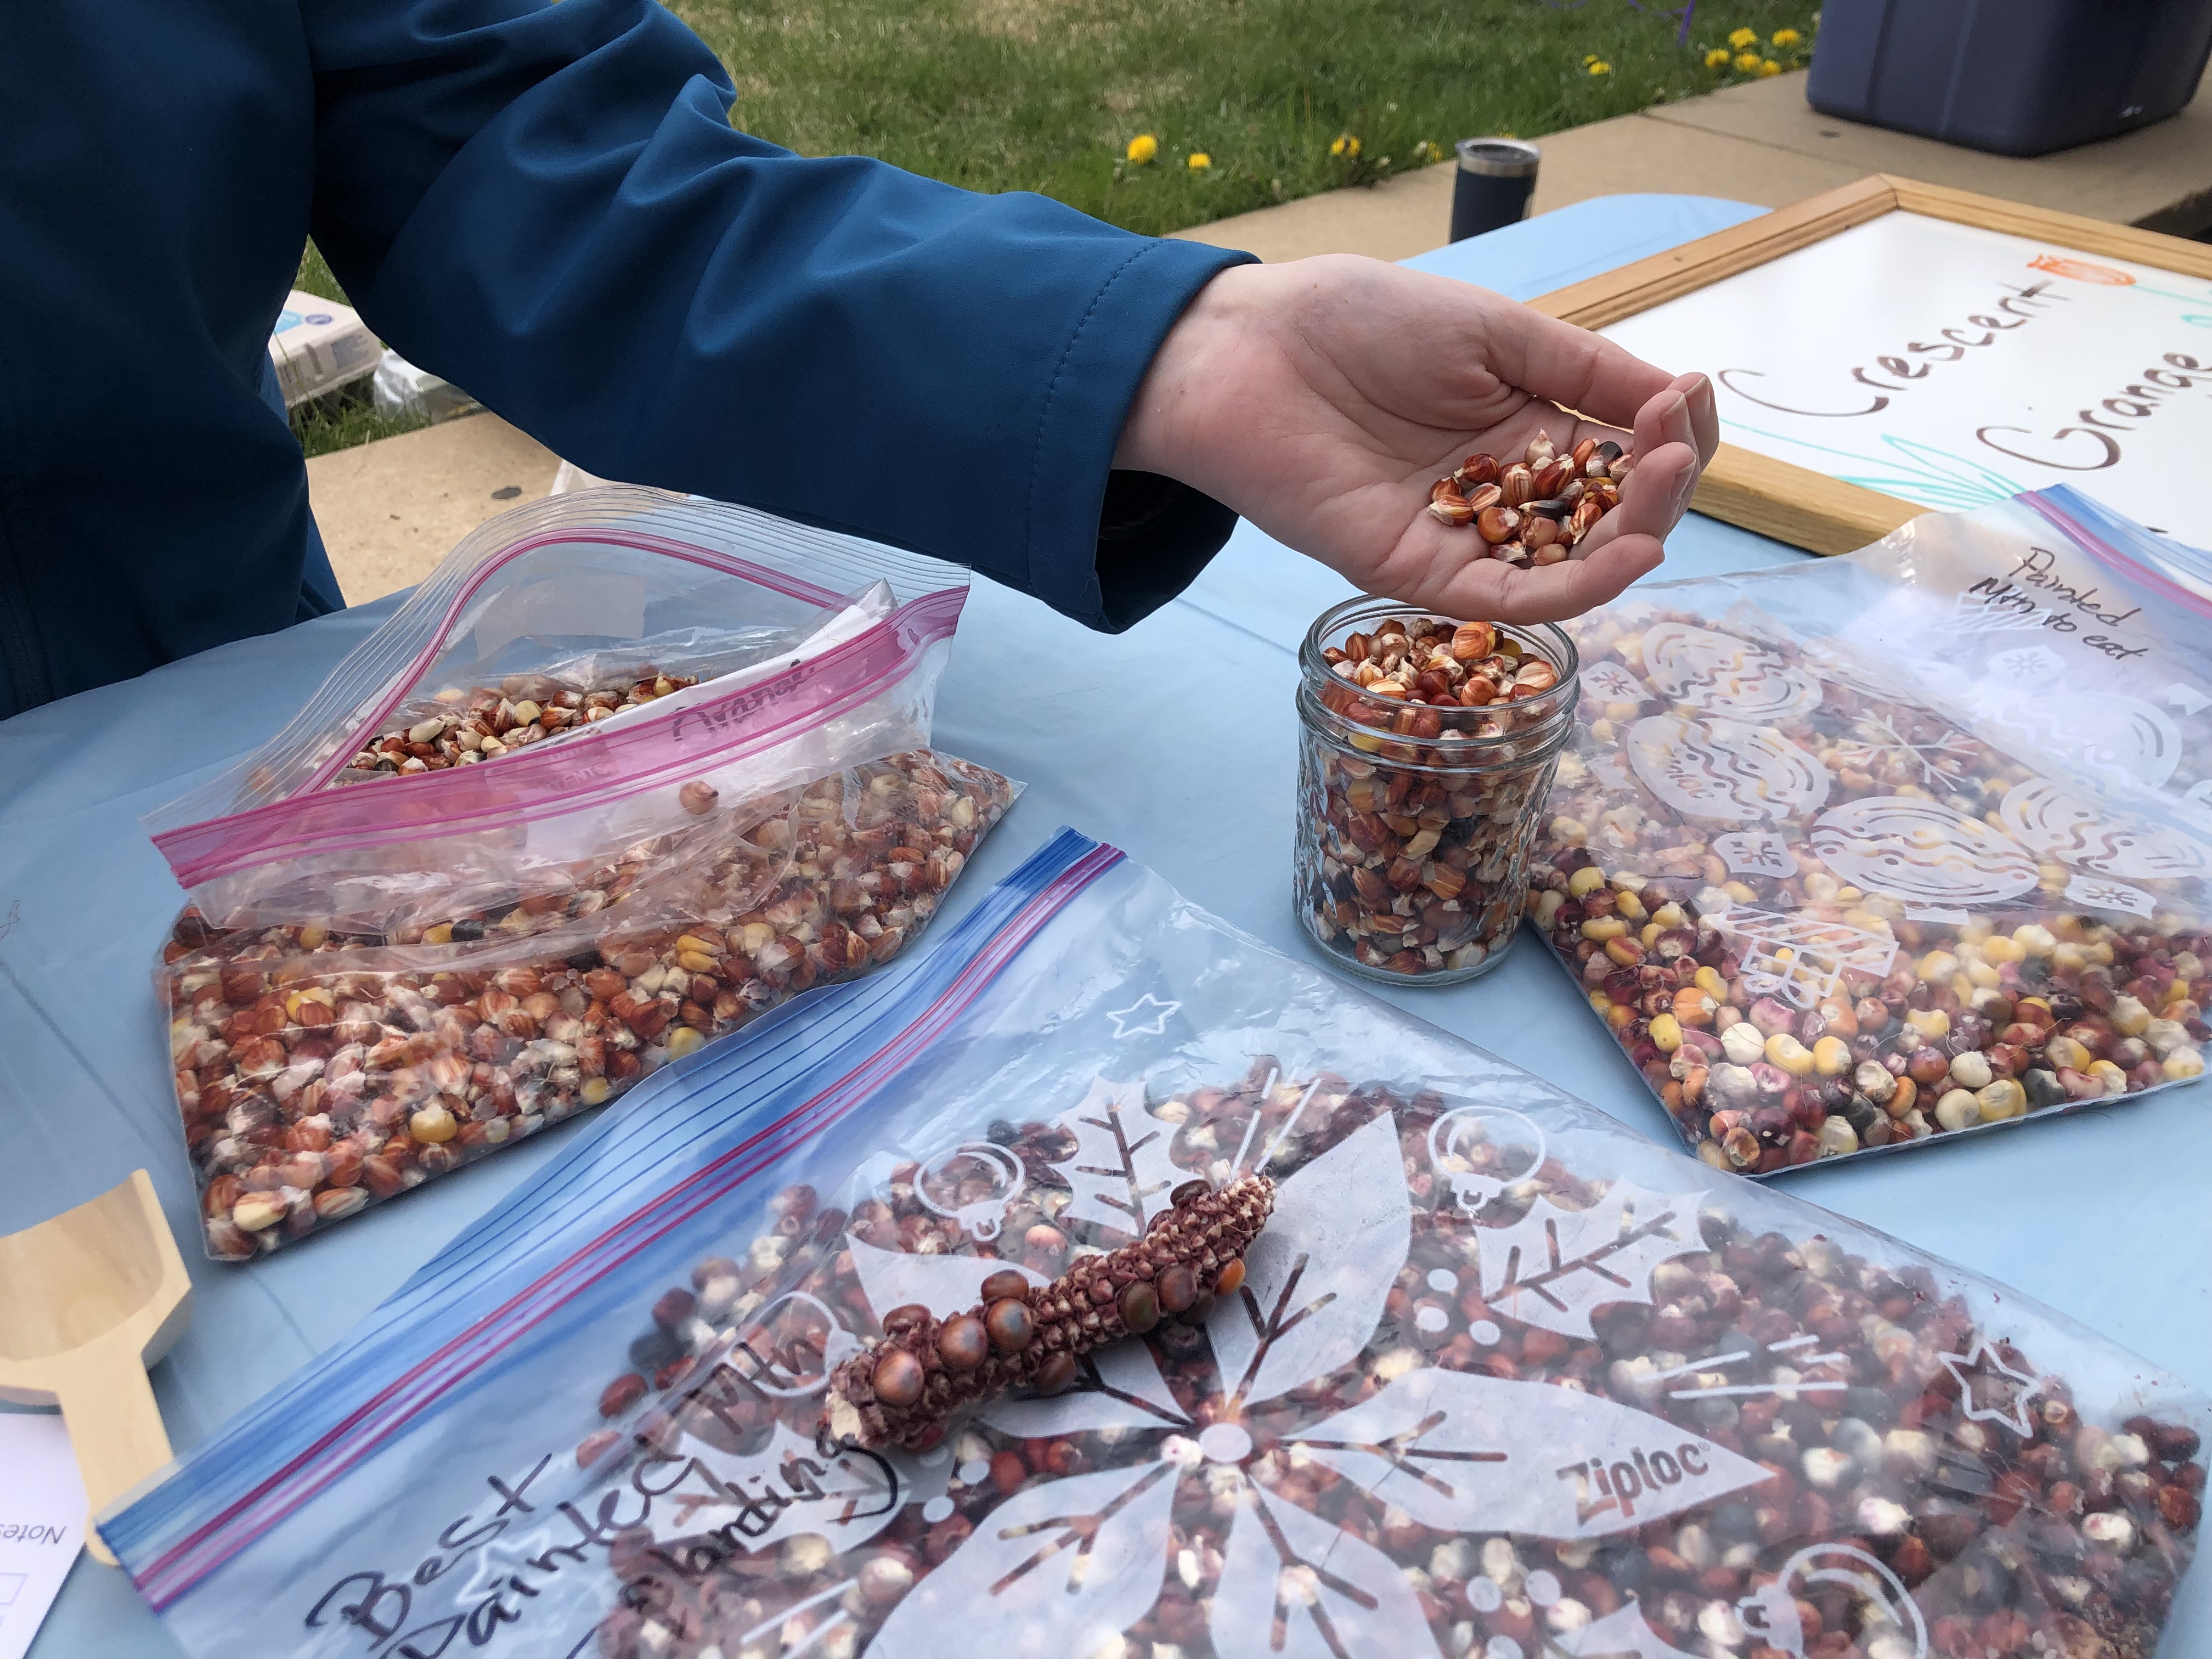 a hand holds native corn kernels above a jar filled with corn kernels. Additional bags of dried corn kernels are visible in the foreground